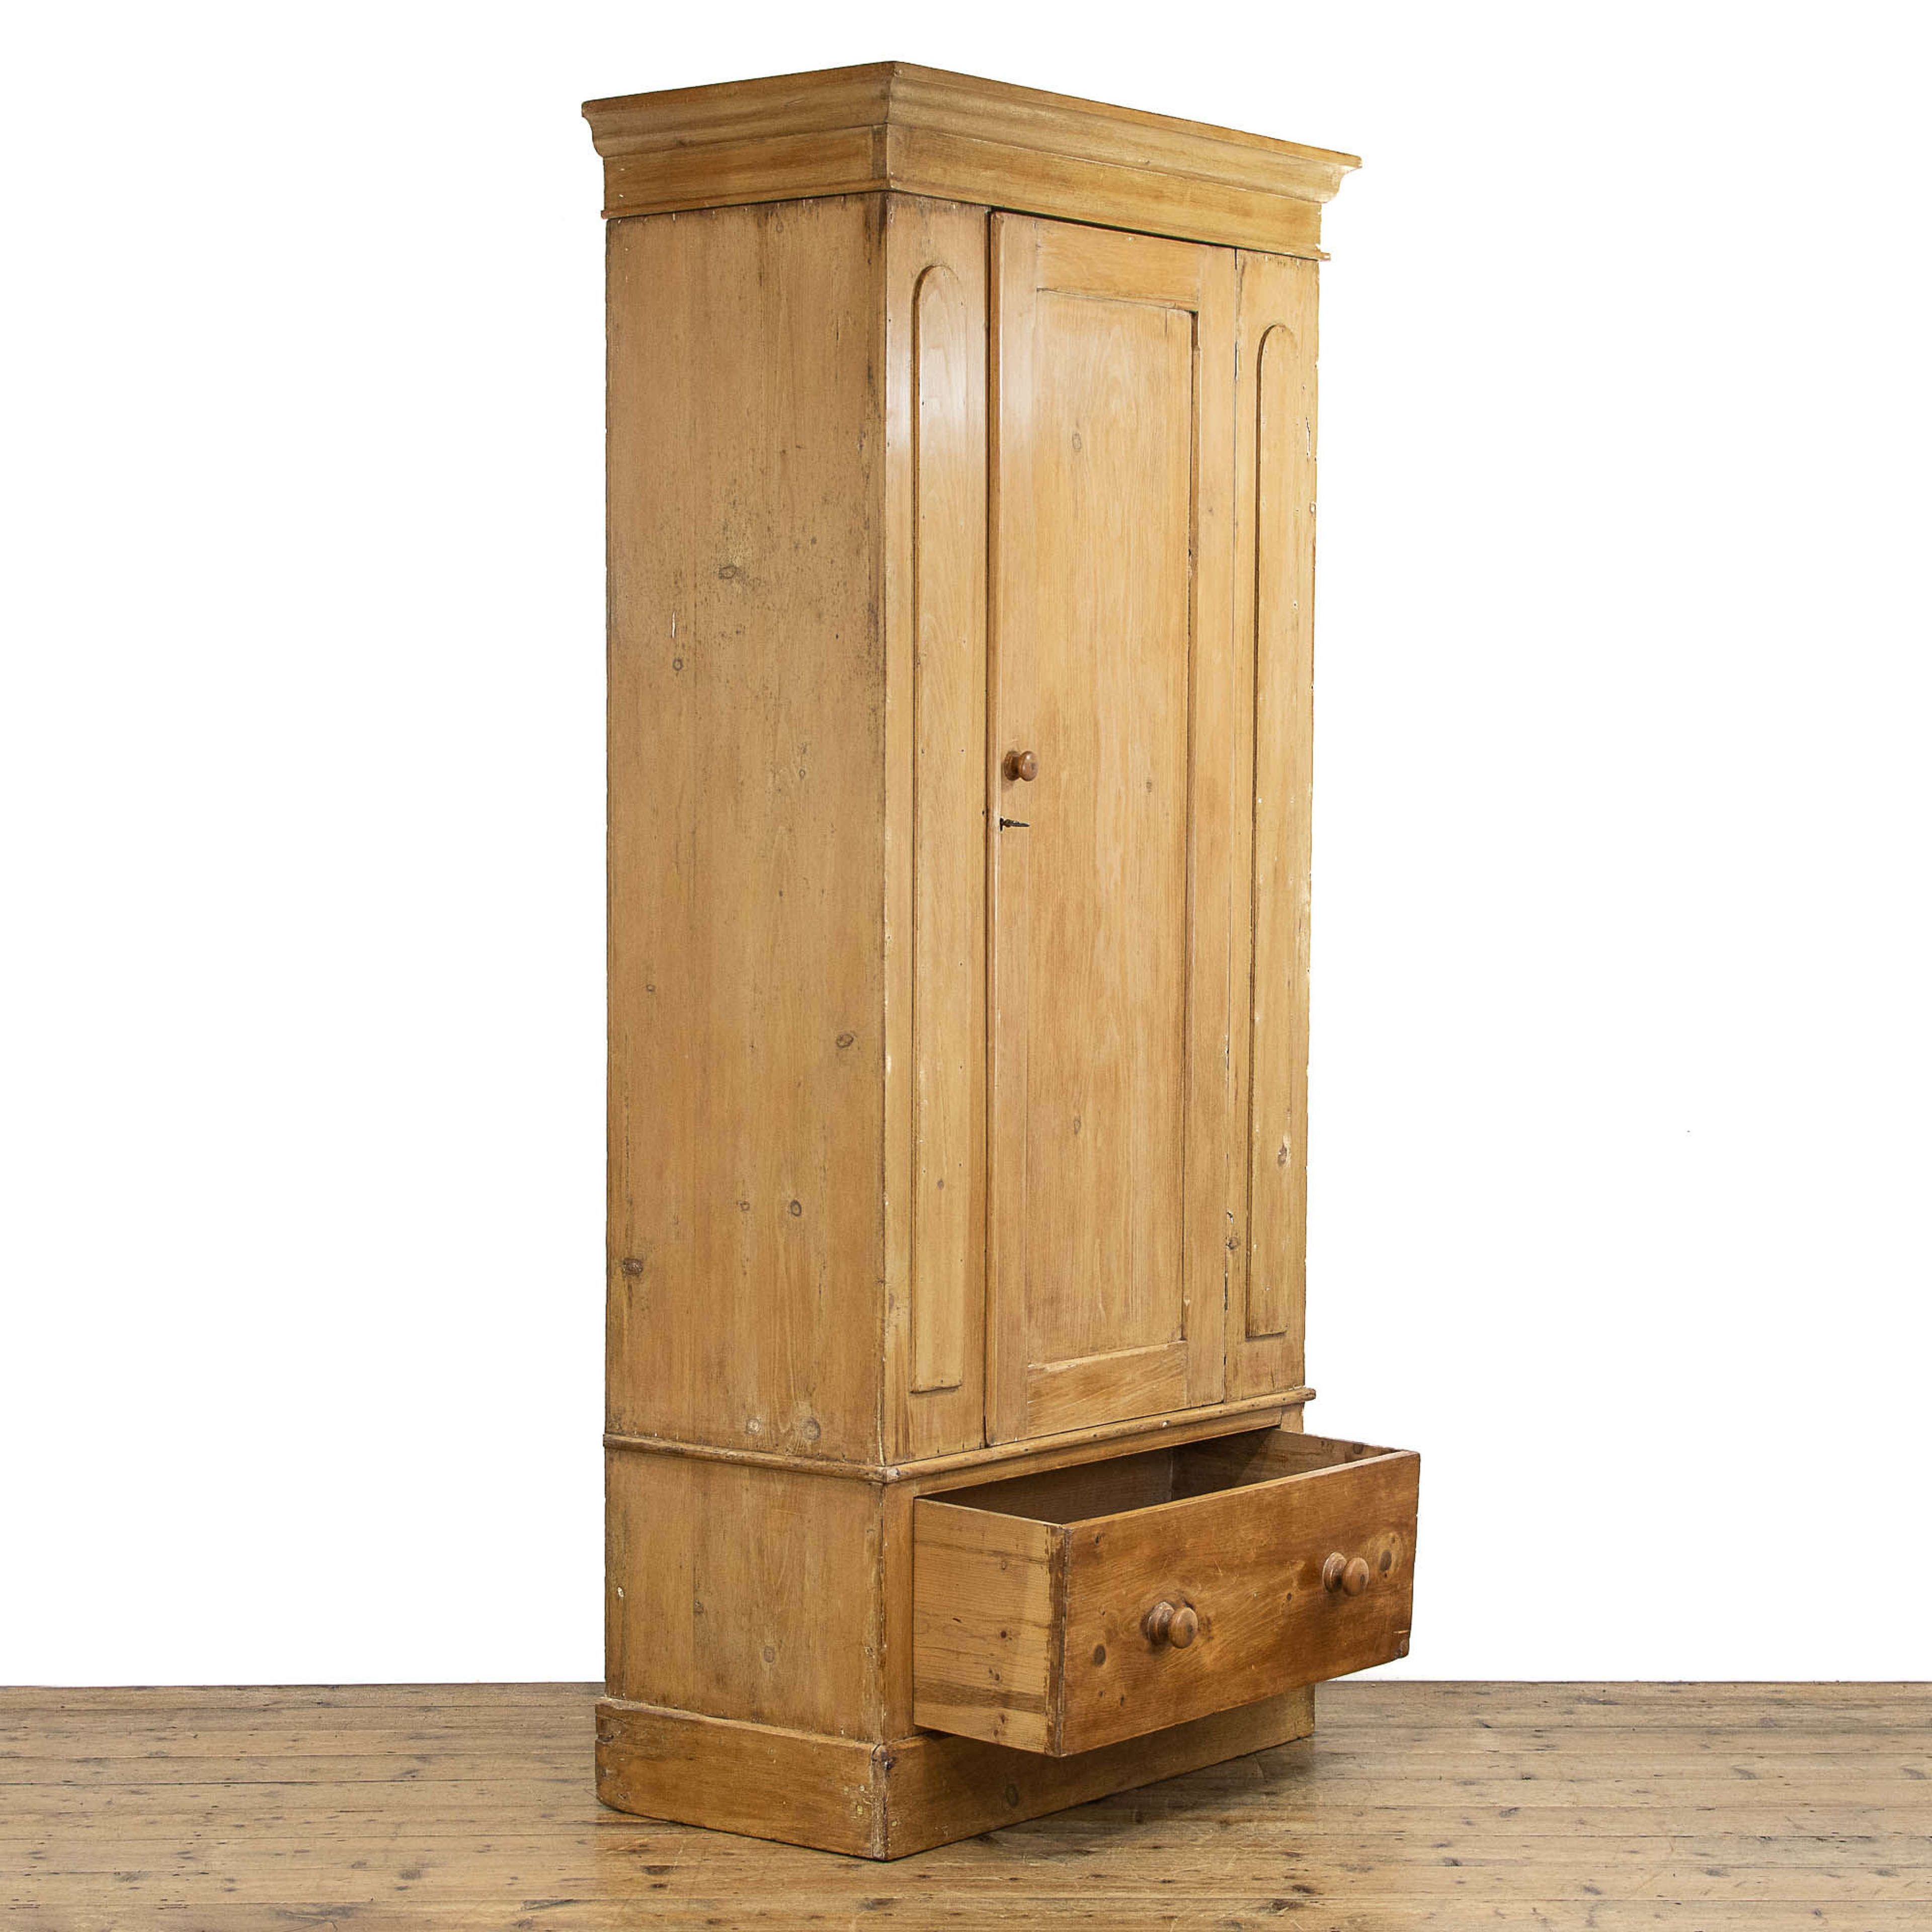 Victorian Stripped Pine Single Wardrobe In Antique Wardrobes & Armoires Inside Antique Single Wardrobes (View 7 of 15)